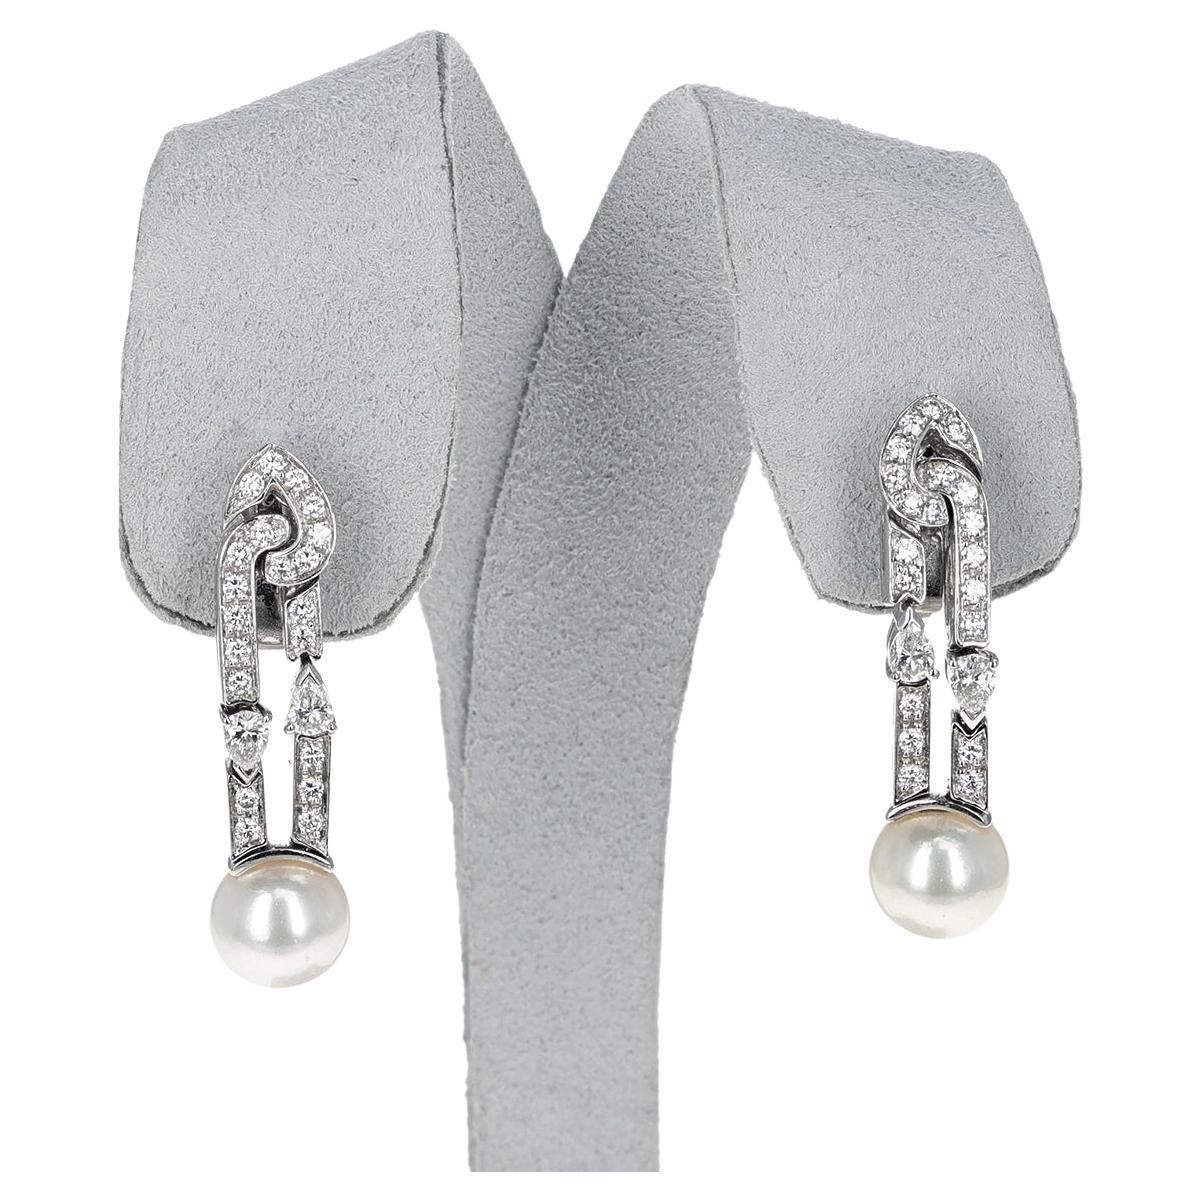 A pair of Bvlgari Cultured Pearl Earrings with Round and Pear Shape Diamonds on top made in 18 Karat White Gold. The total weight of the diamonds is appx. 0.85 carats. The total weight of the earring is 12.58 grams. Length is appx. 3.5CM. Original